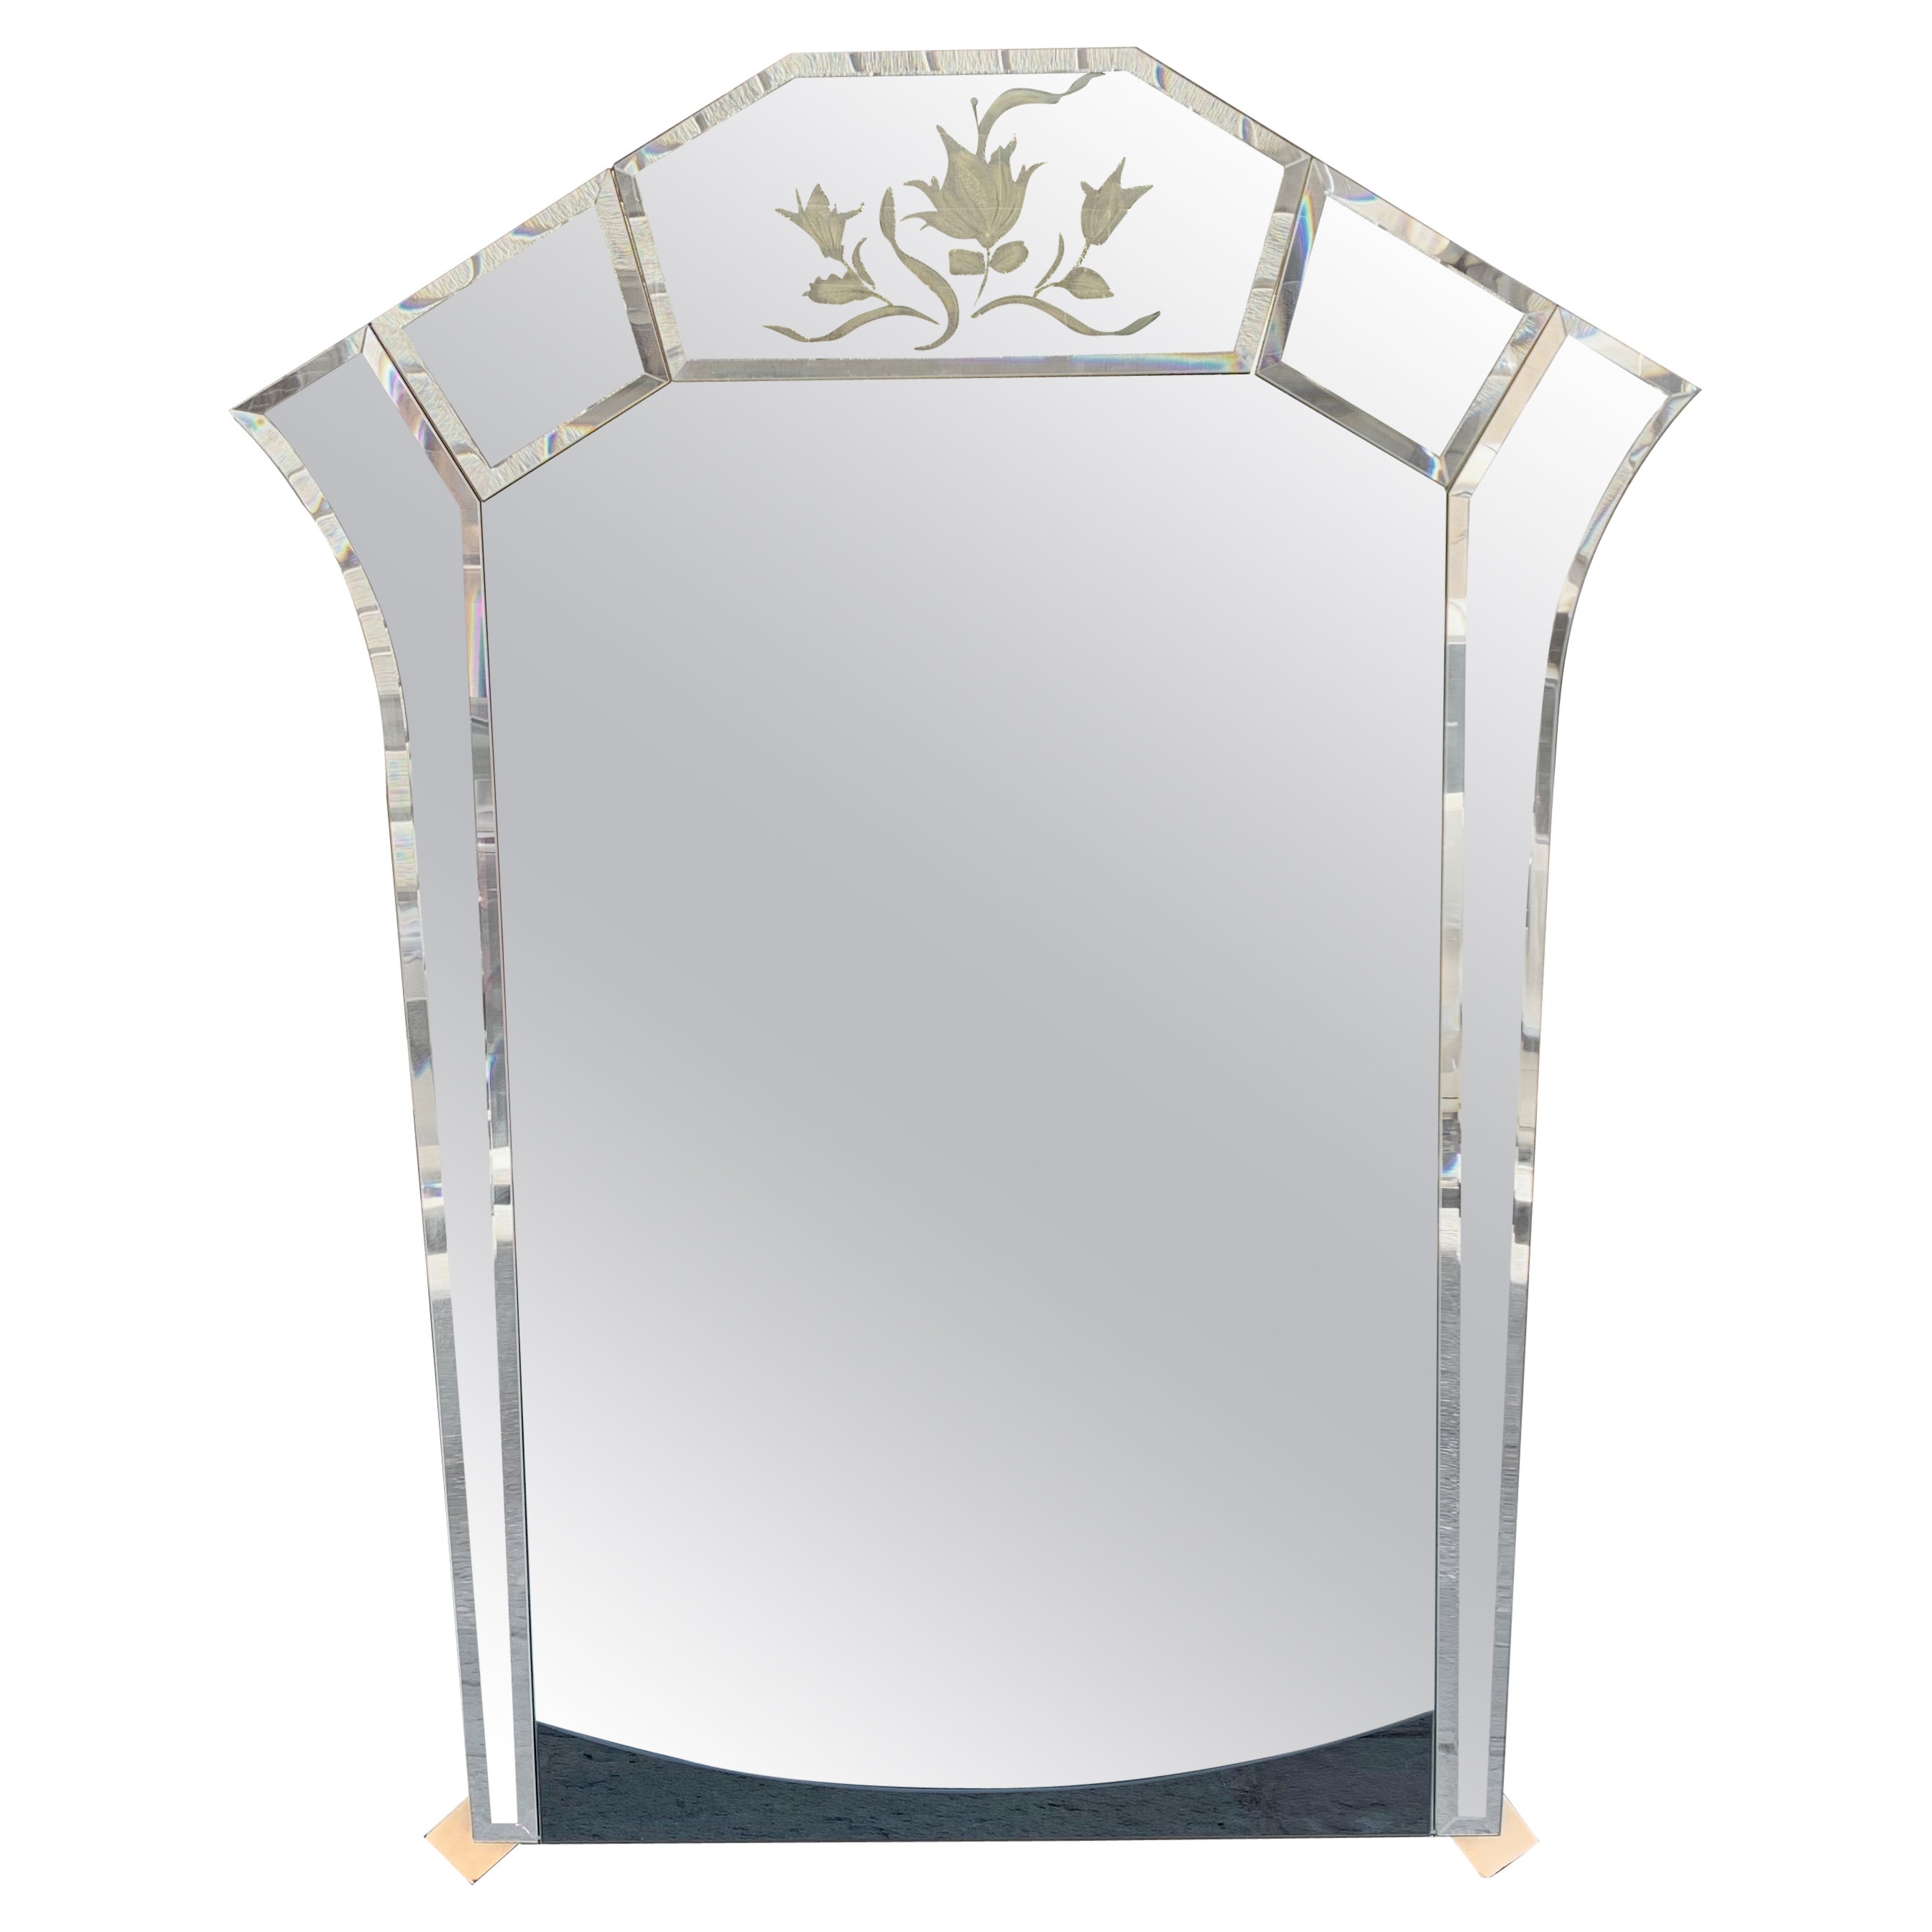 Art Deco Mercury Ground Glass Mirror with Engravings, 1940s For Sale